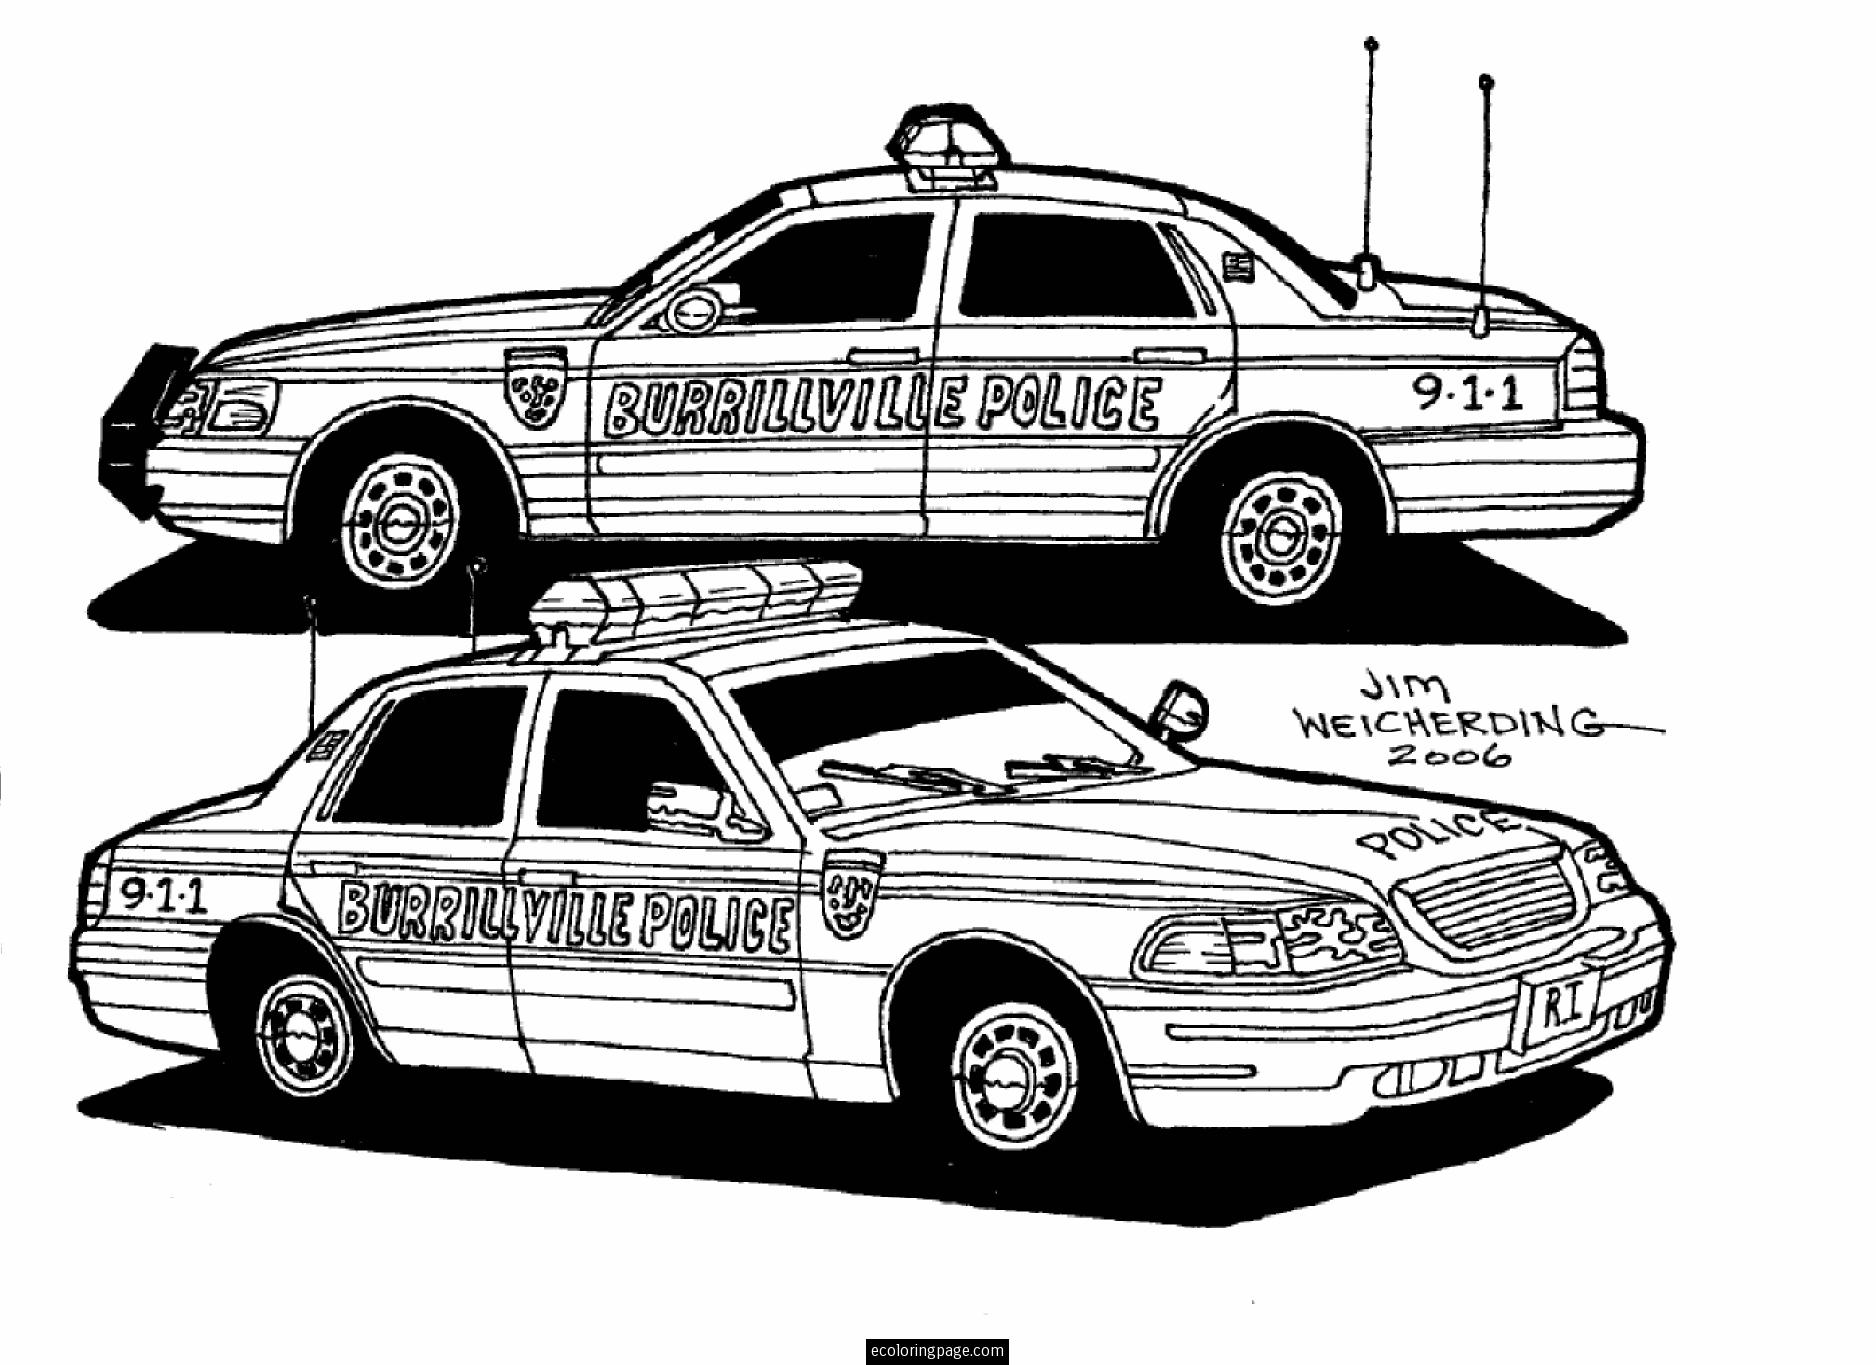 Free Colouring Pages Of Police Cars, Download Free Colouring Pages Of ...